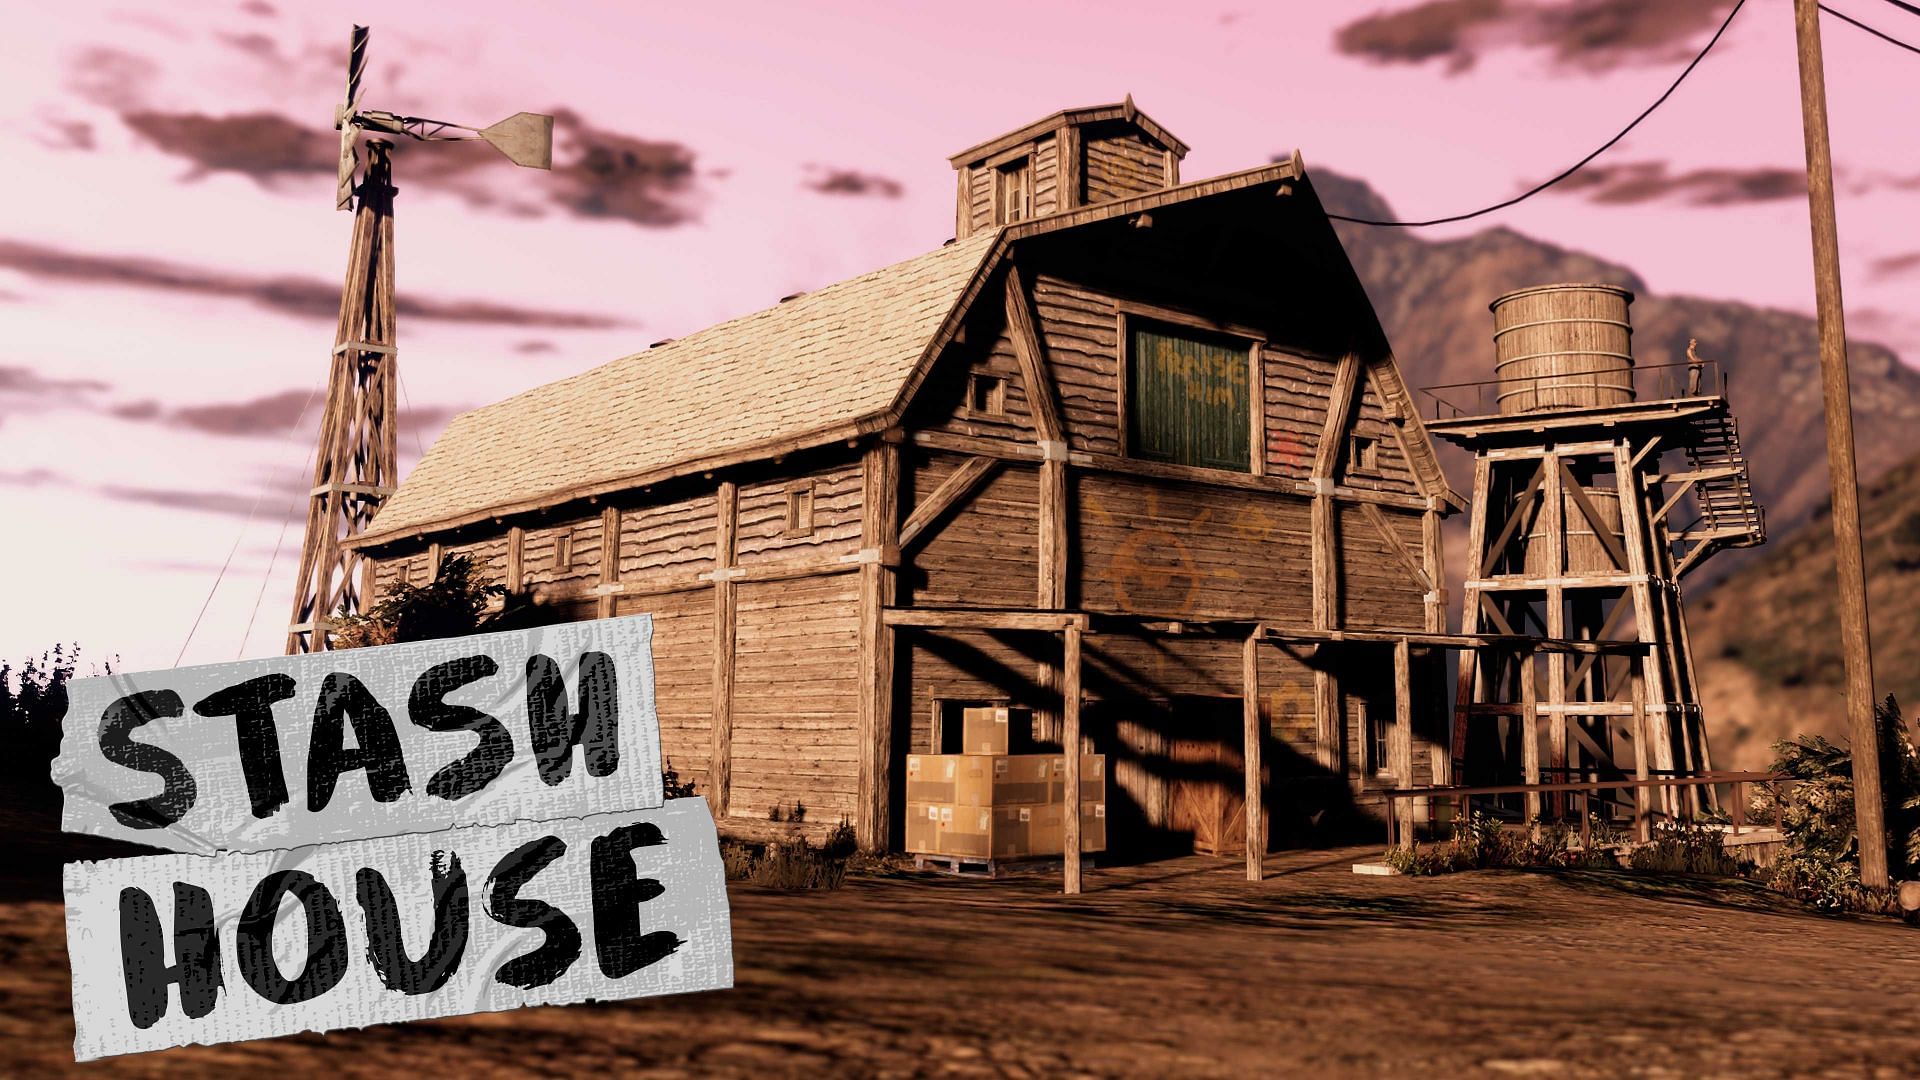 All the houses in gta 5 фото 1